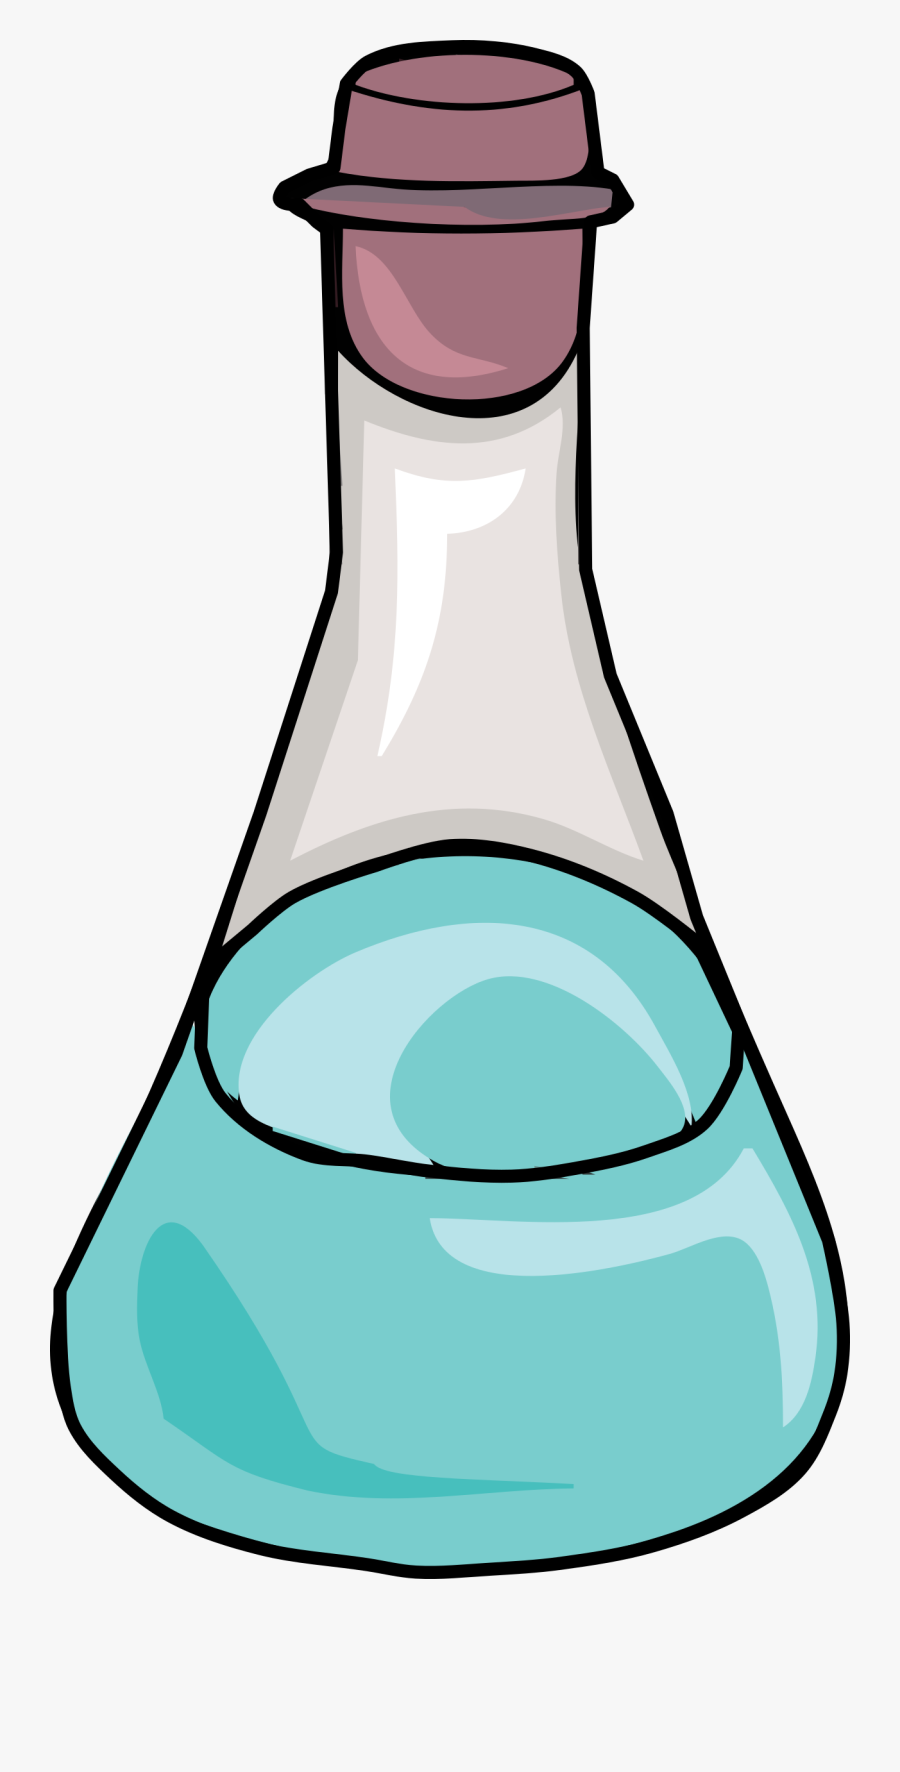 This Free Icons Png Design Of Science Flask Pluspng - Clipart Science Potion Bottles, Transparent Clipart